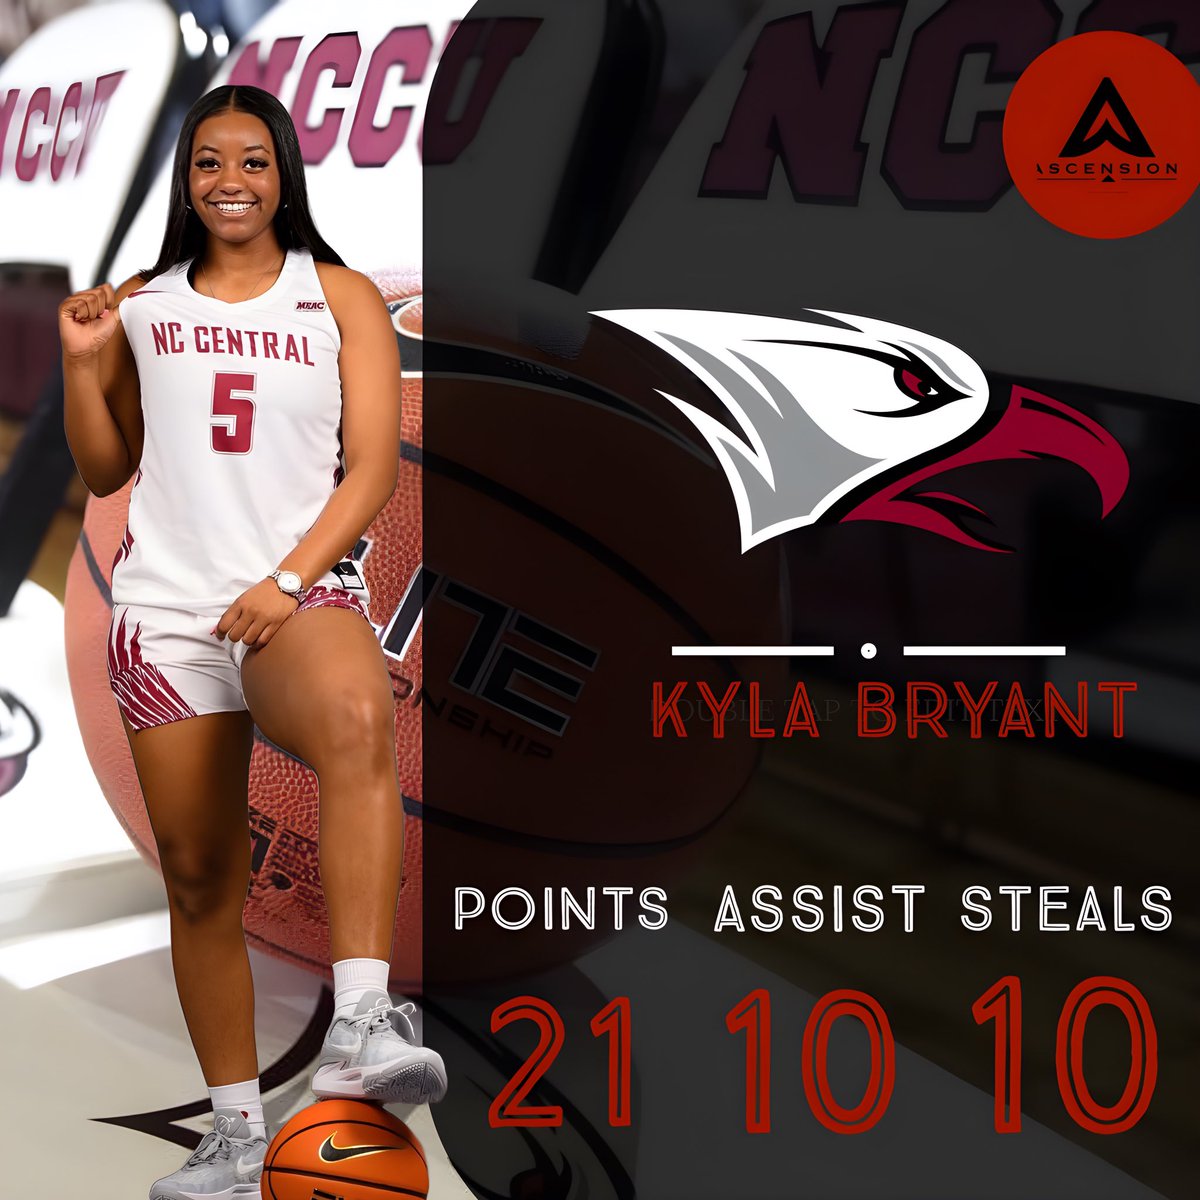 Ascension Sports Kyla Bryant/ NC Central logged a triple double!The bigtime Freshman is just getting started. #ItsJustALittleWork #KeepAscending @AscensionSport1